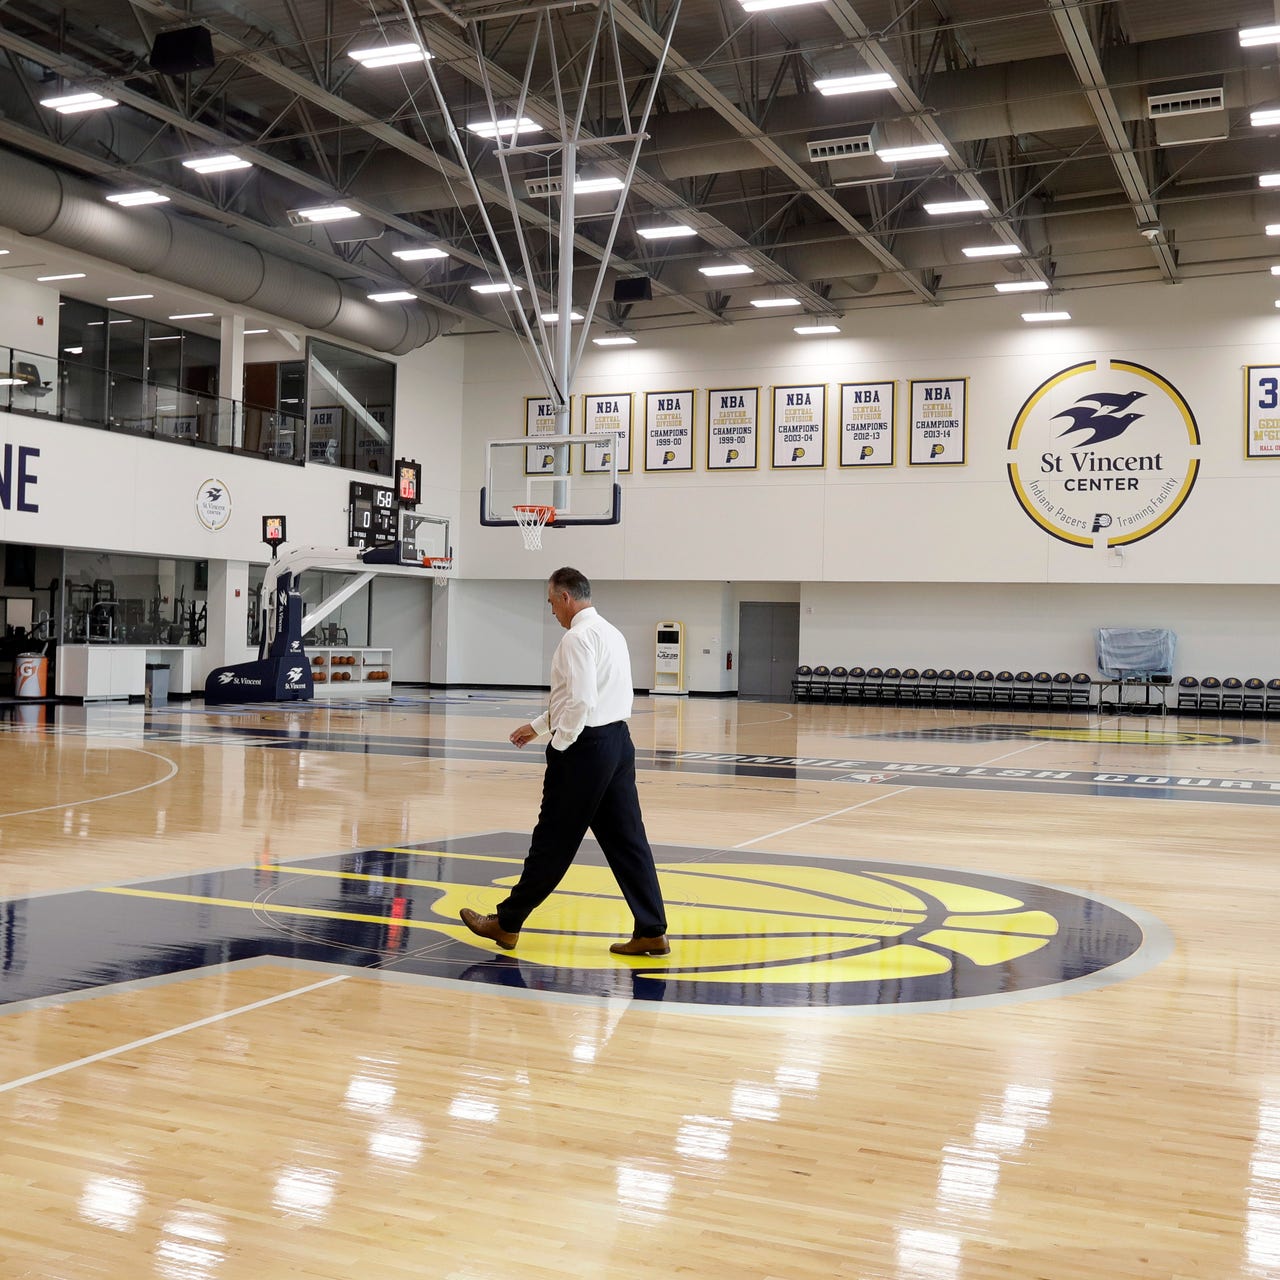 Pacers say new practice facility will build better team